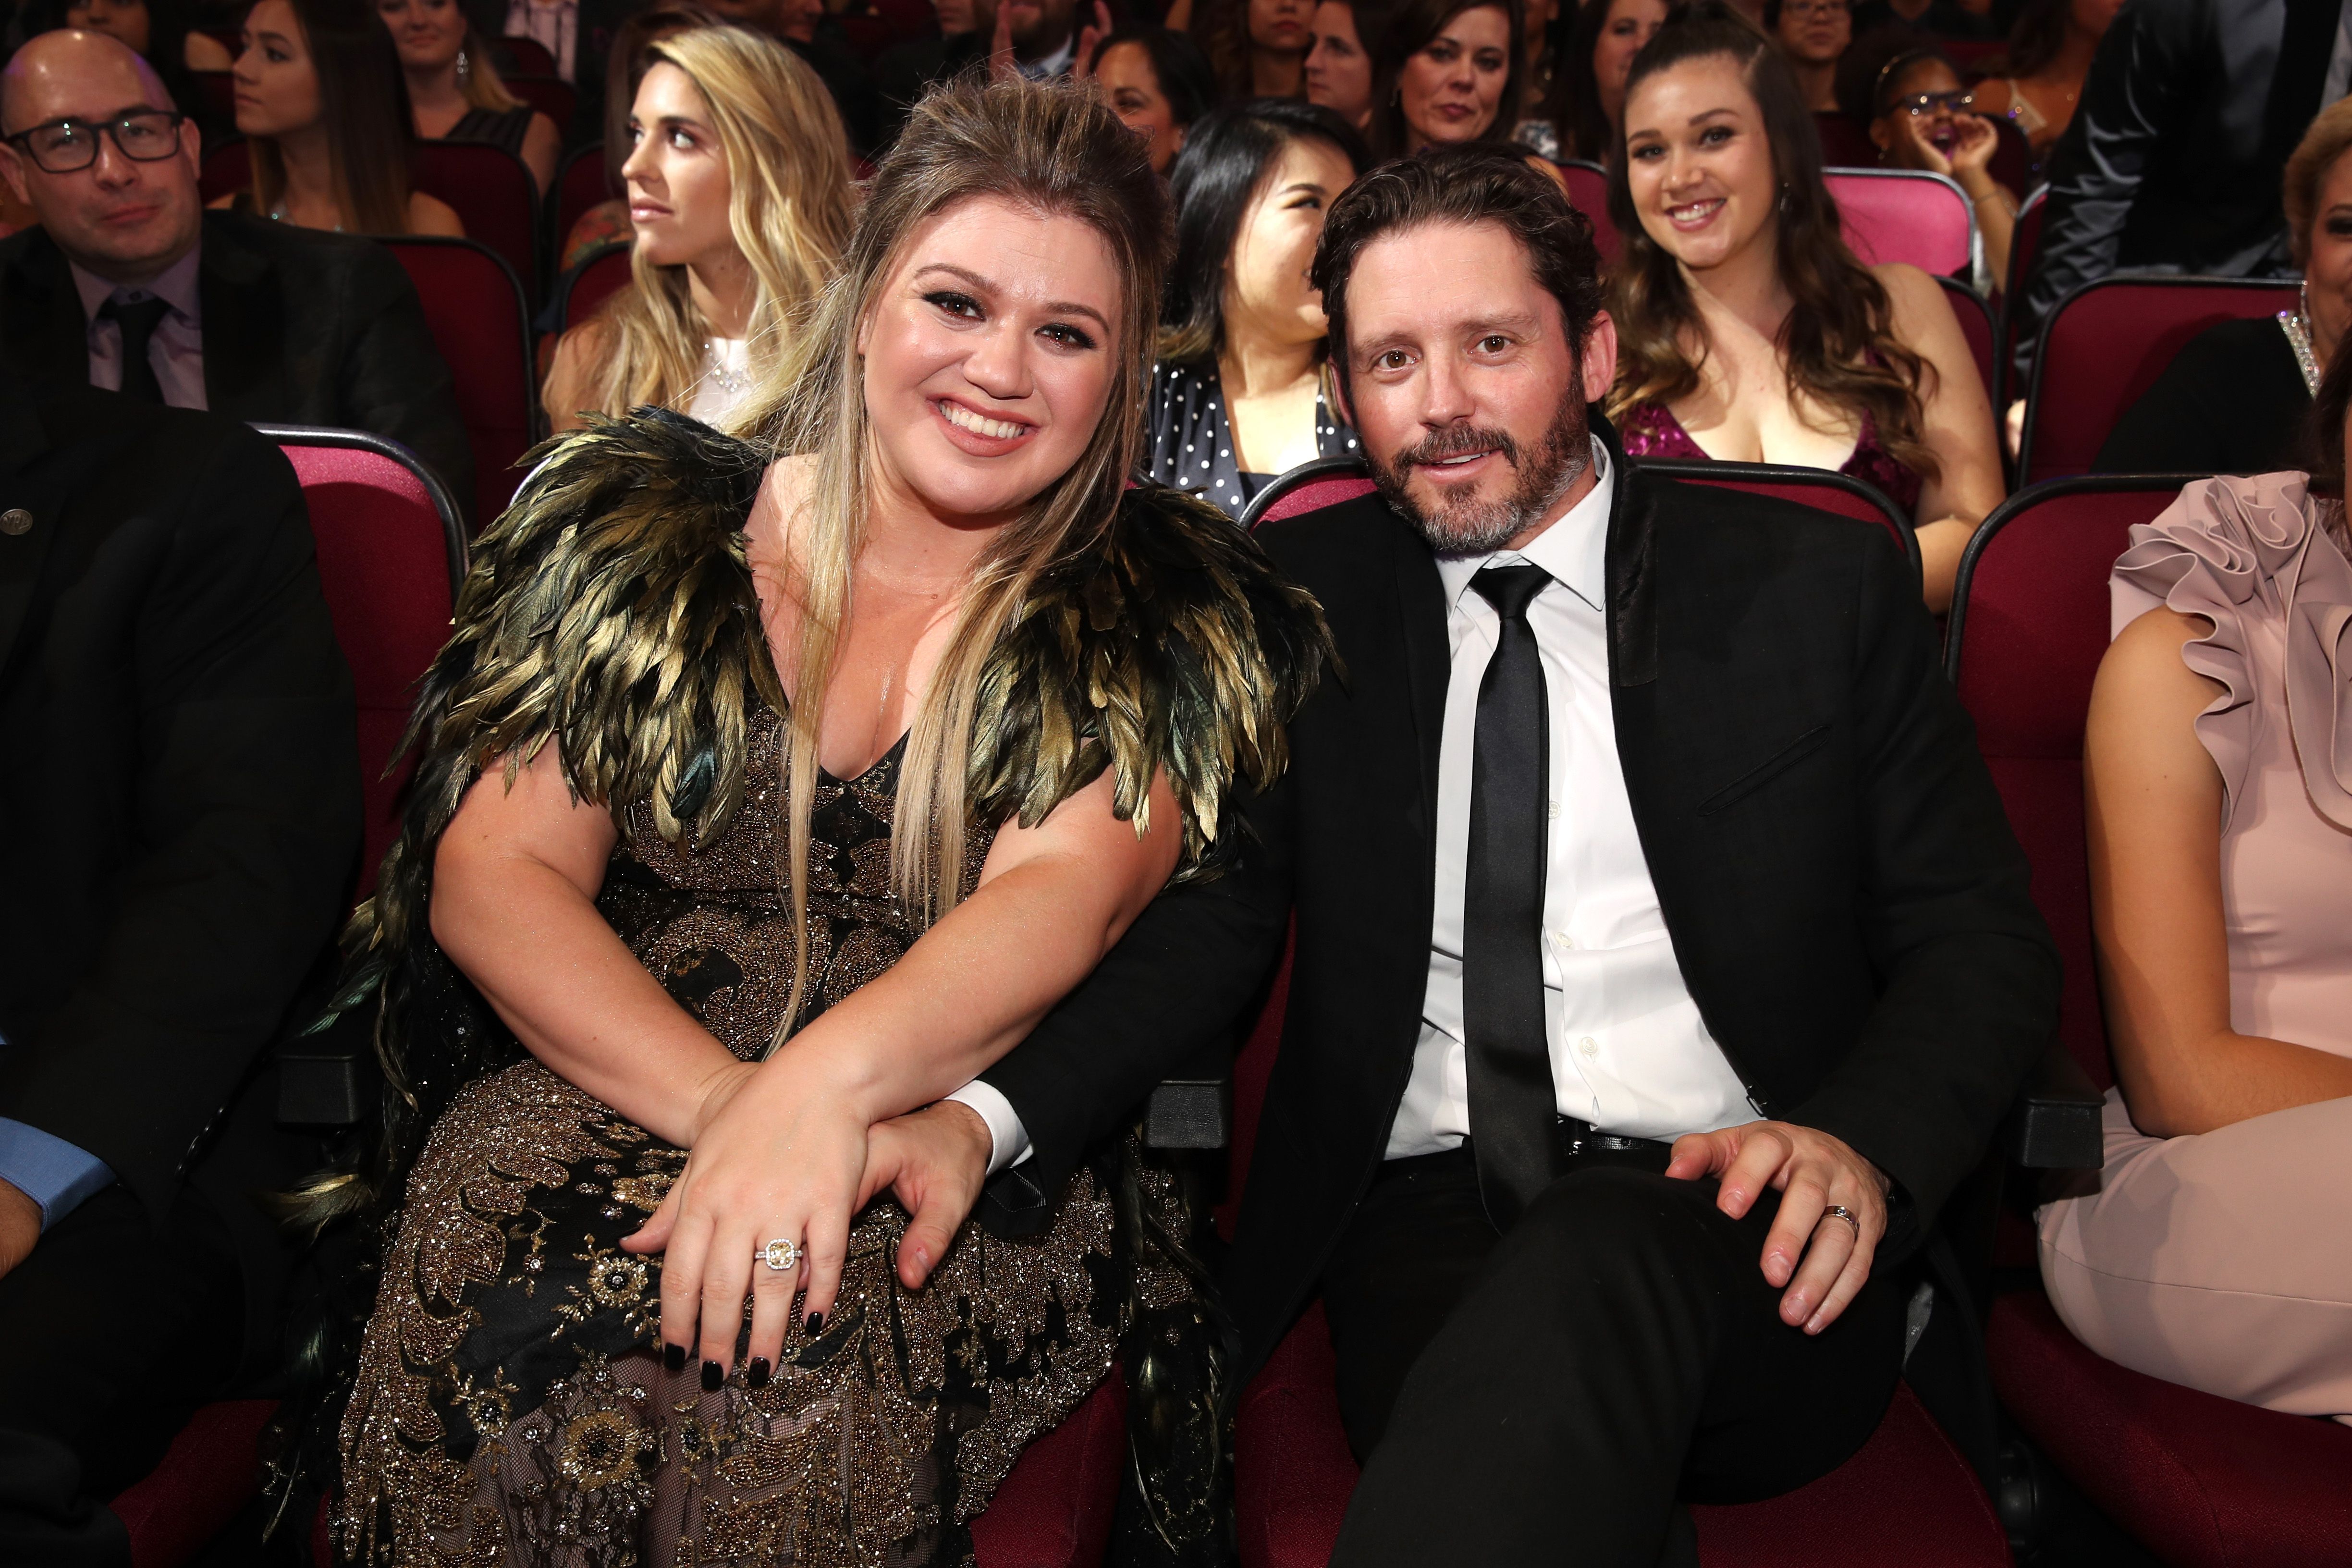 Kelly Clarkson and Brandon Blackstock during the 2017 American Music Awards at Microsoft Theater on November 19, 2017, in Los Angeles, California. | Source: Getty Images